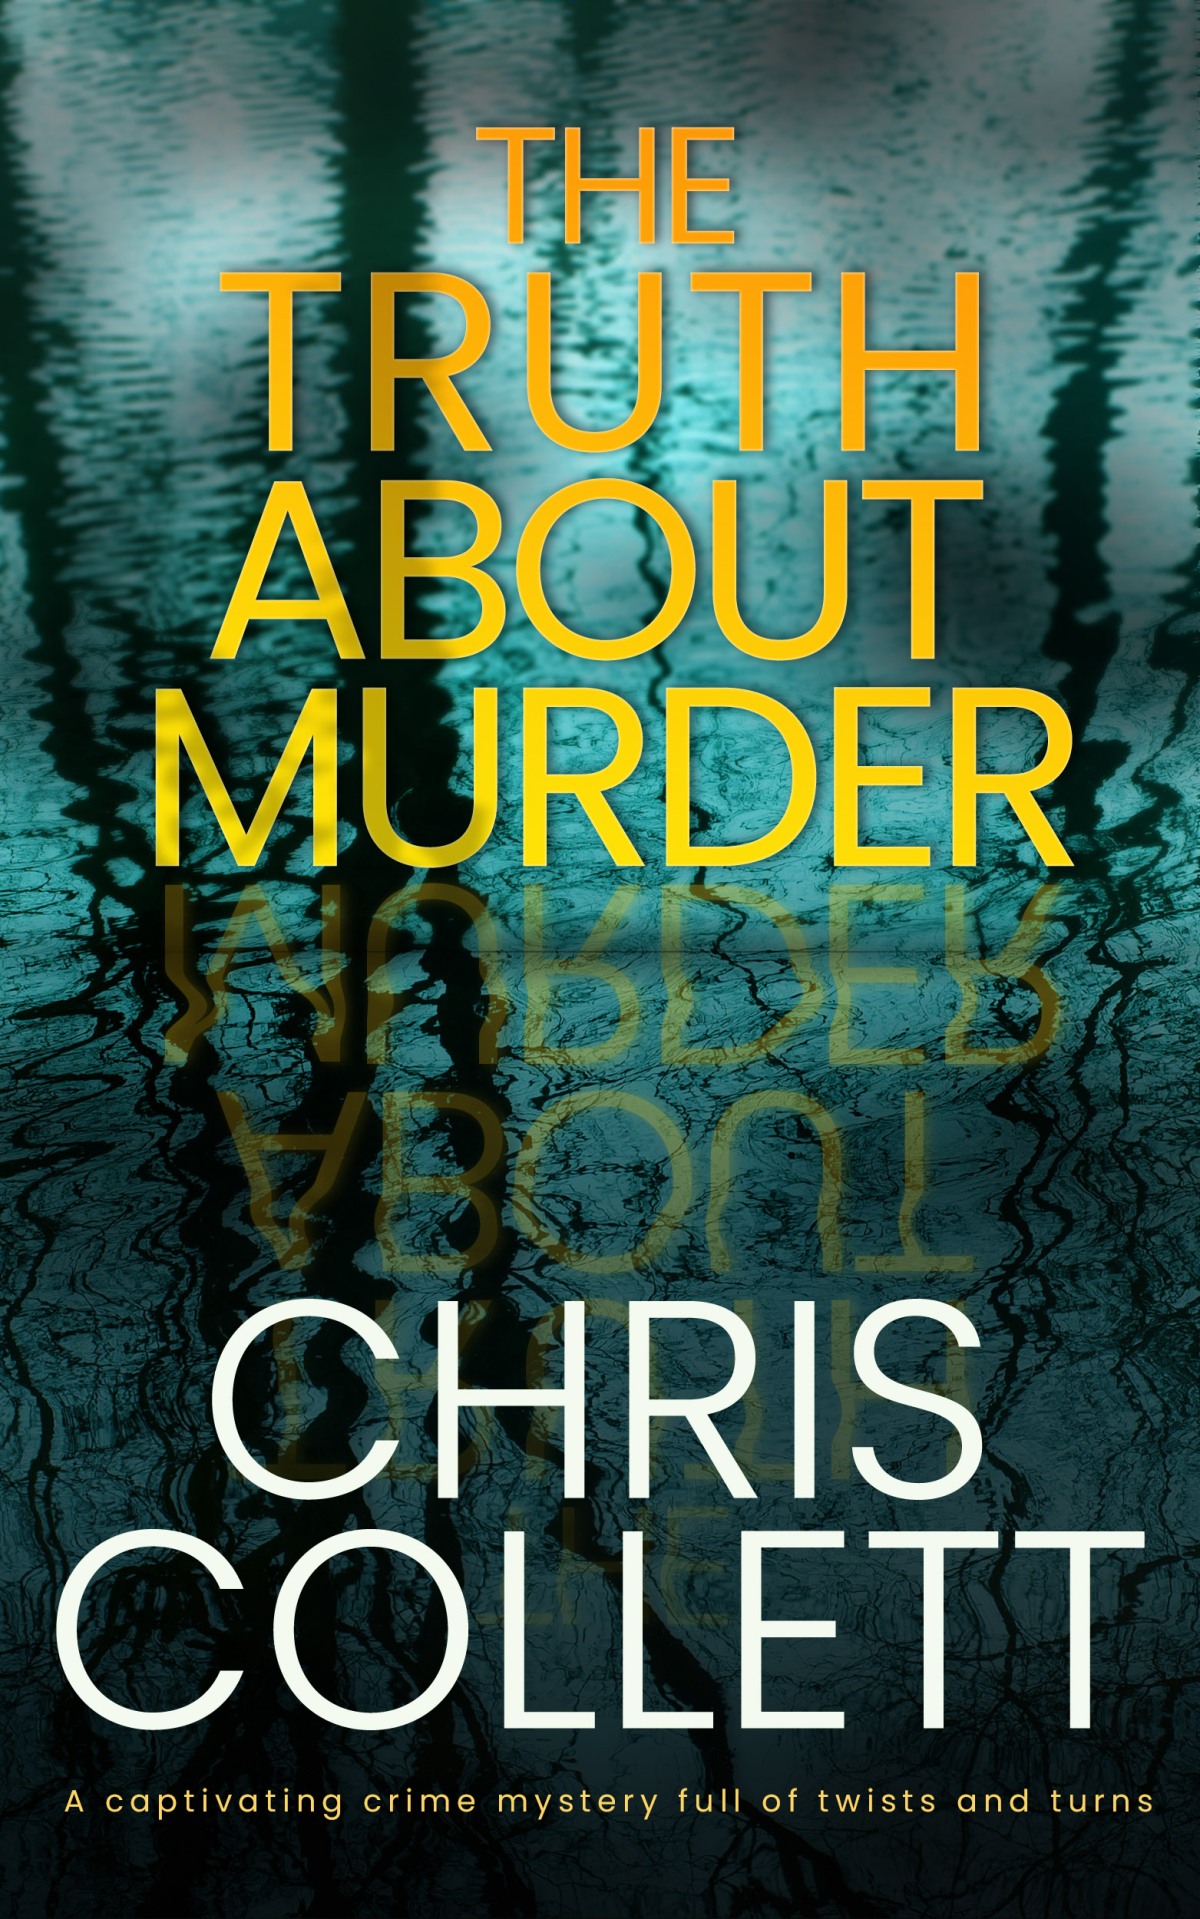 #BlogTour #Review The Truth About Murder by Chris Collett @JoffeBooks @crime_crow